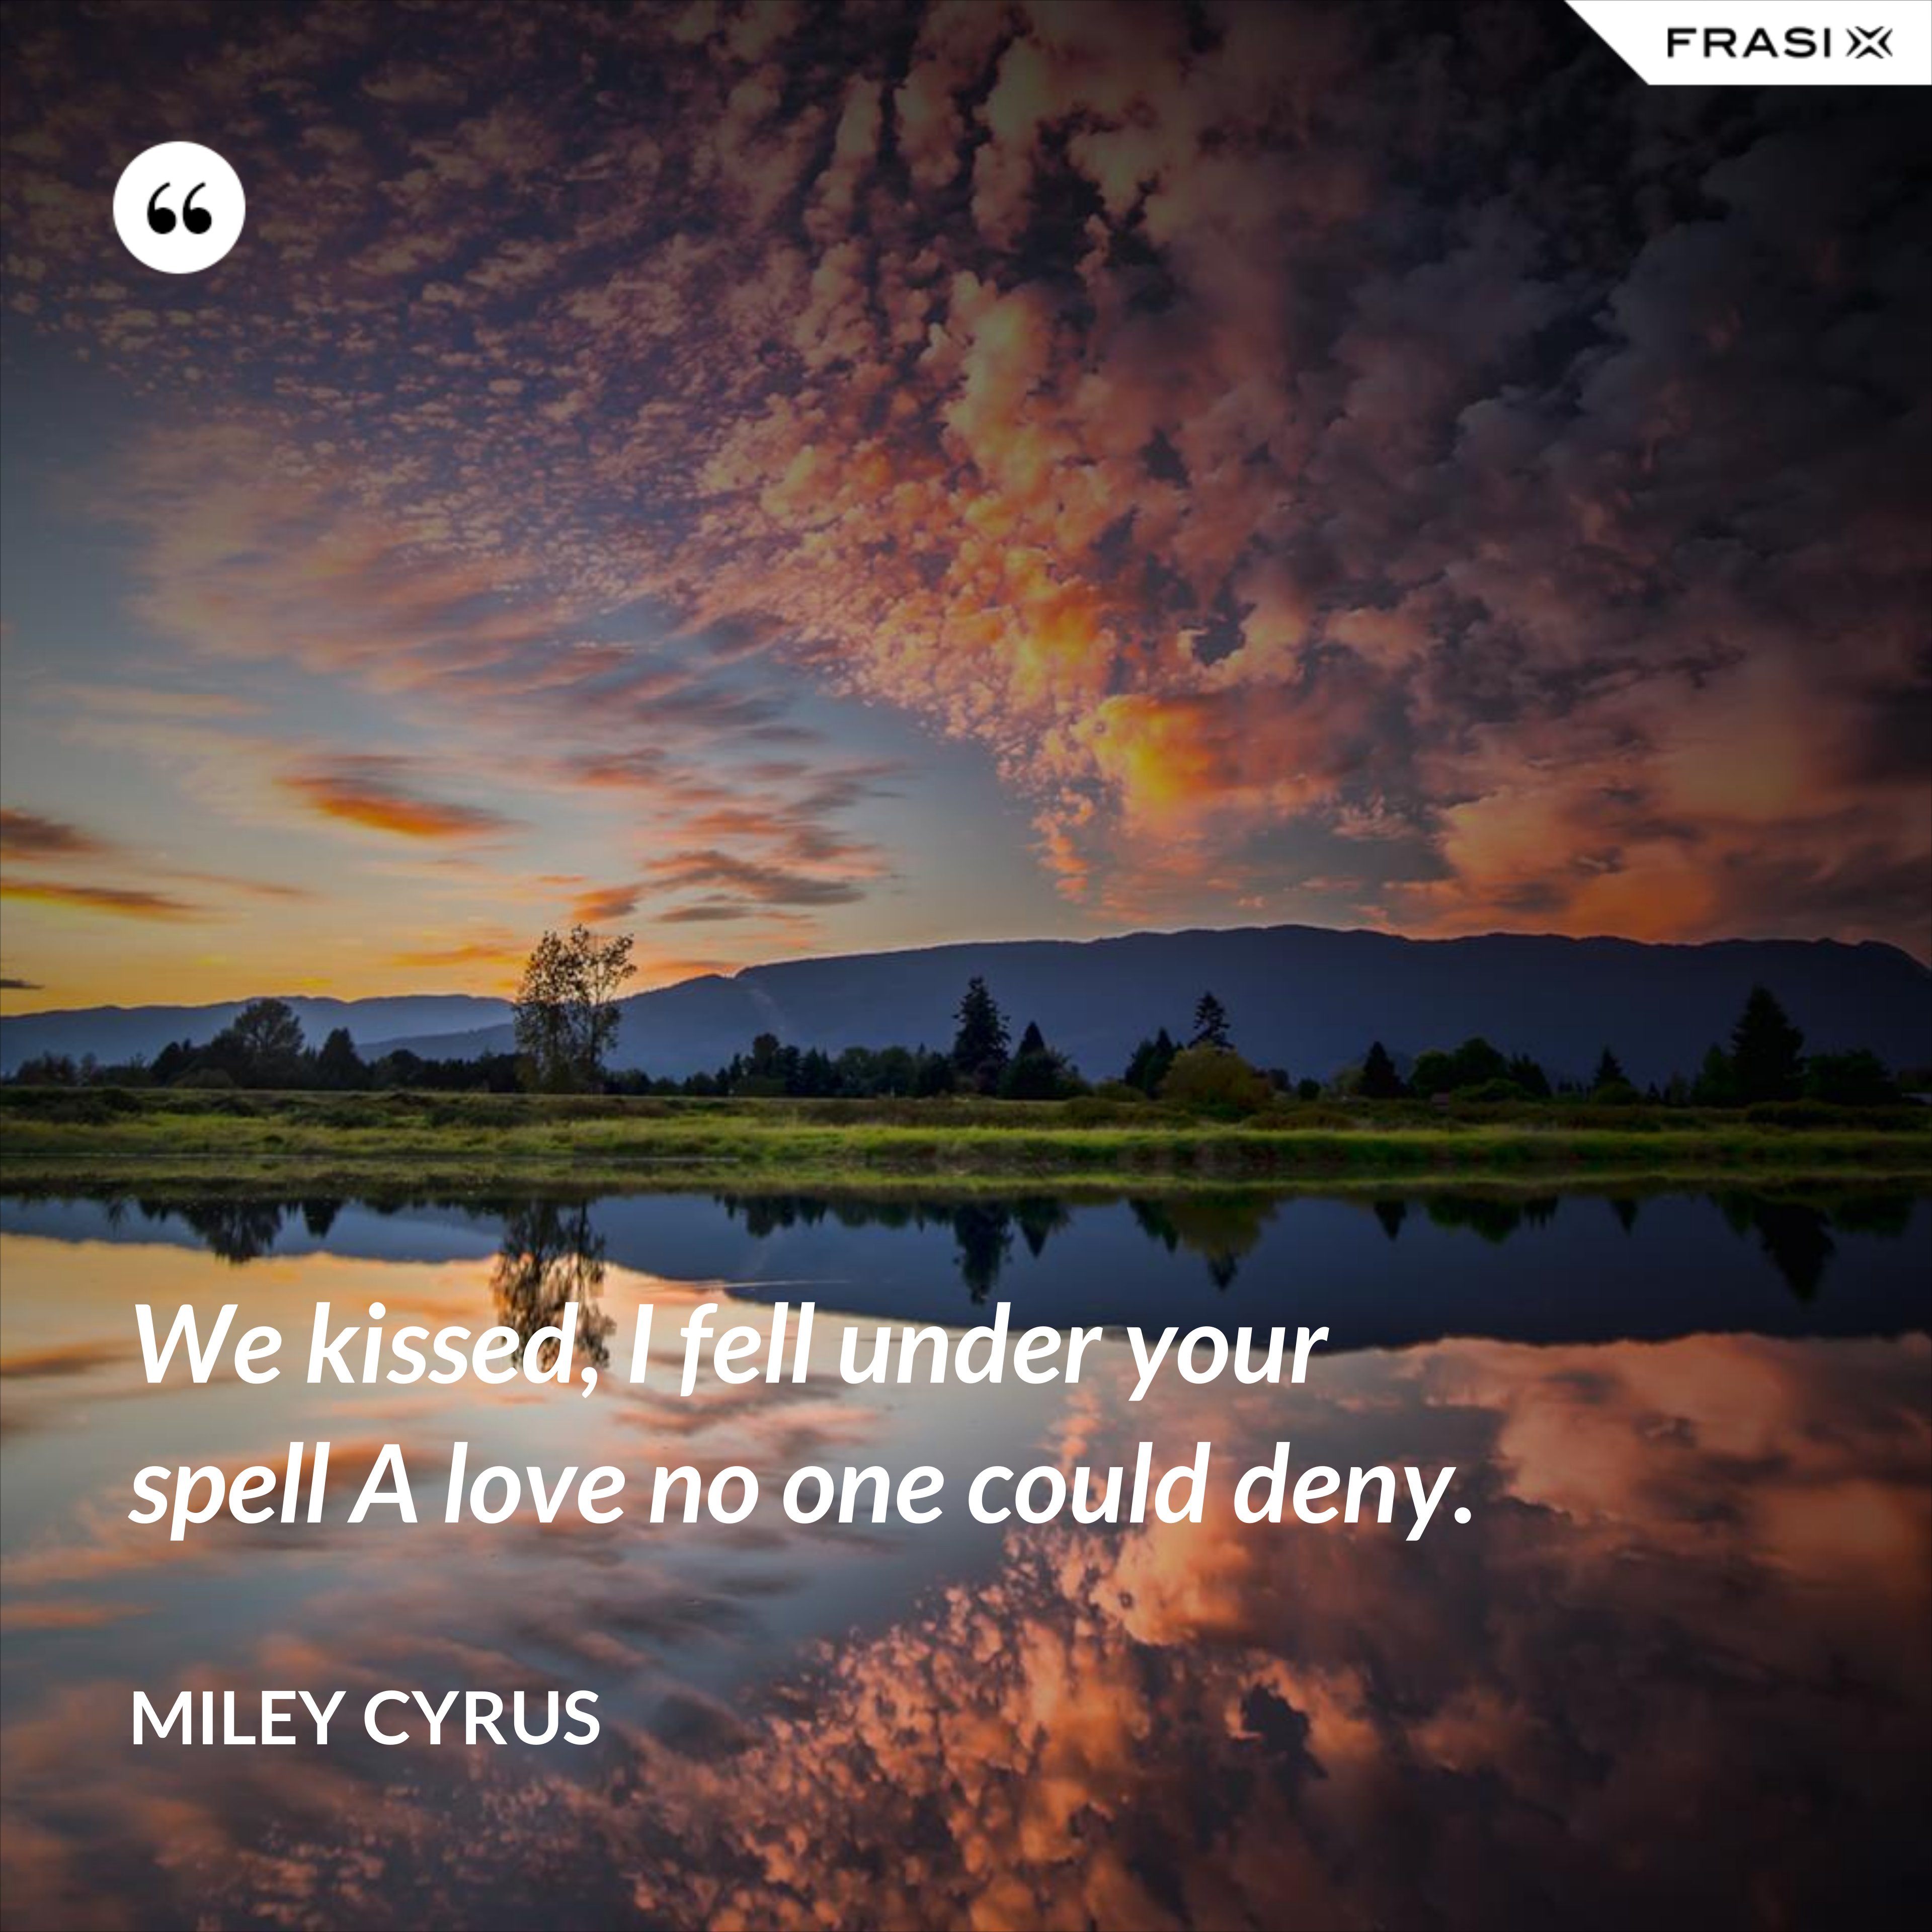 We kissed, I fell under your spell A love no one could deny. - Miley Cyrus